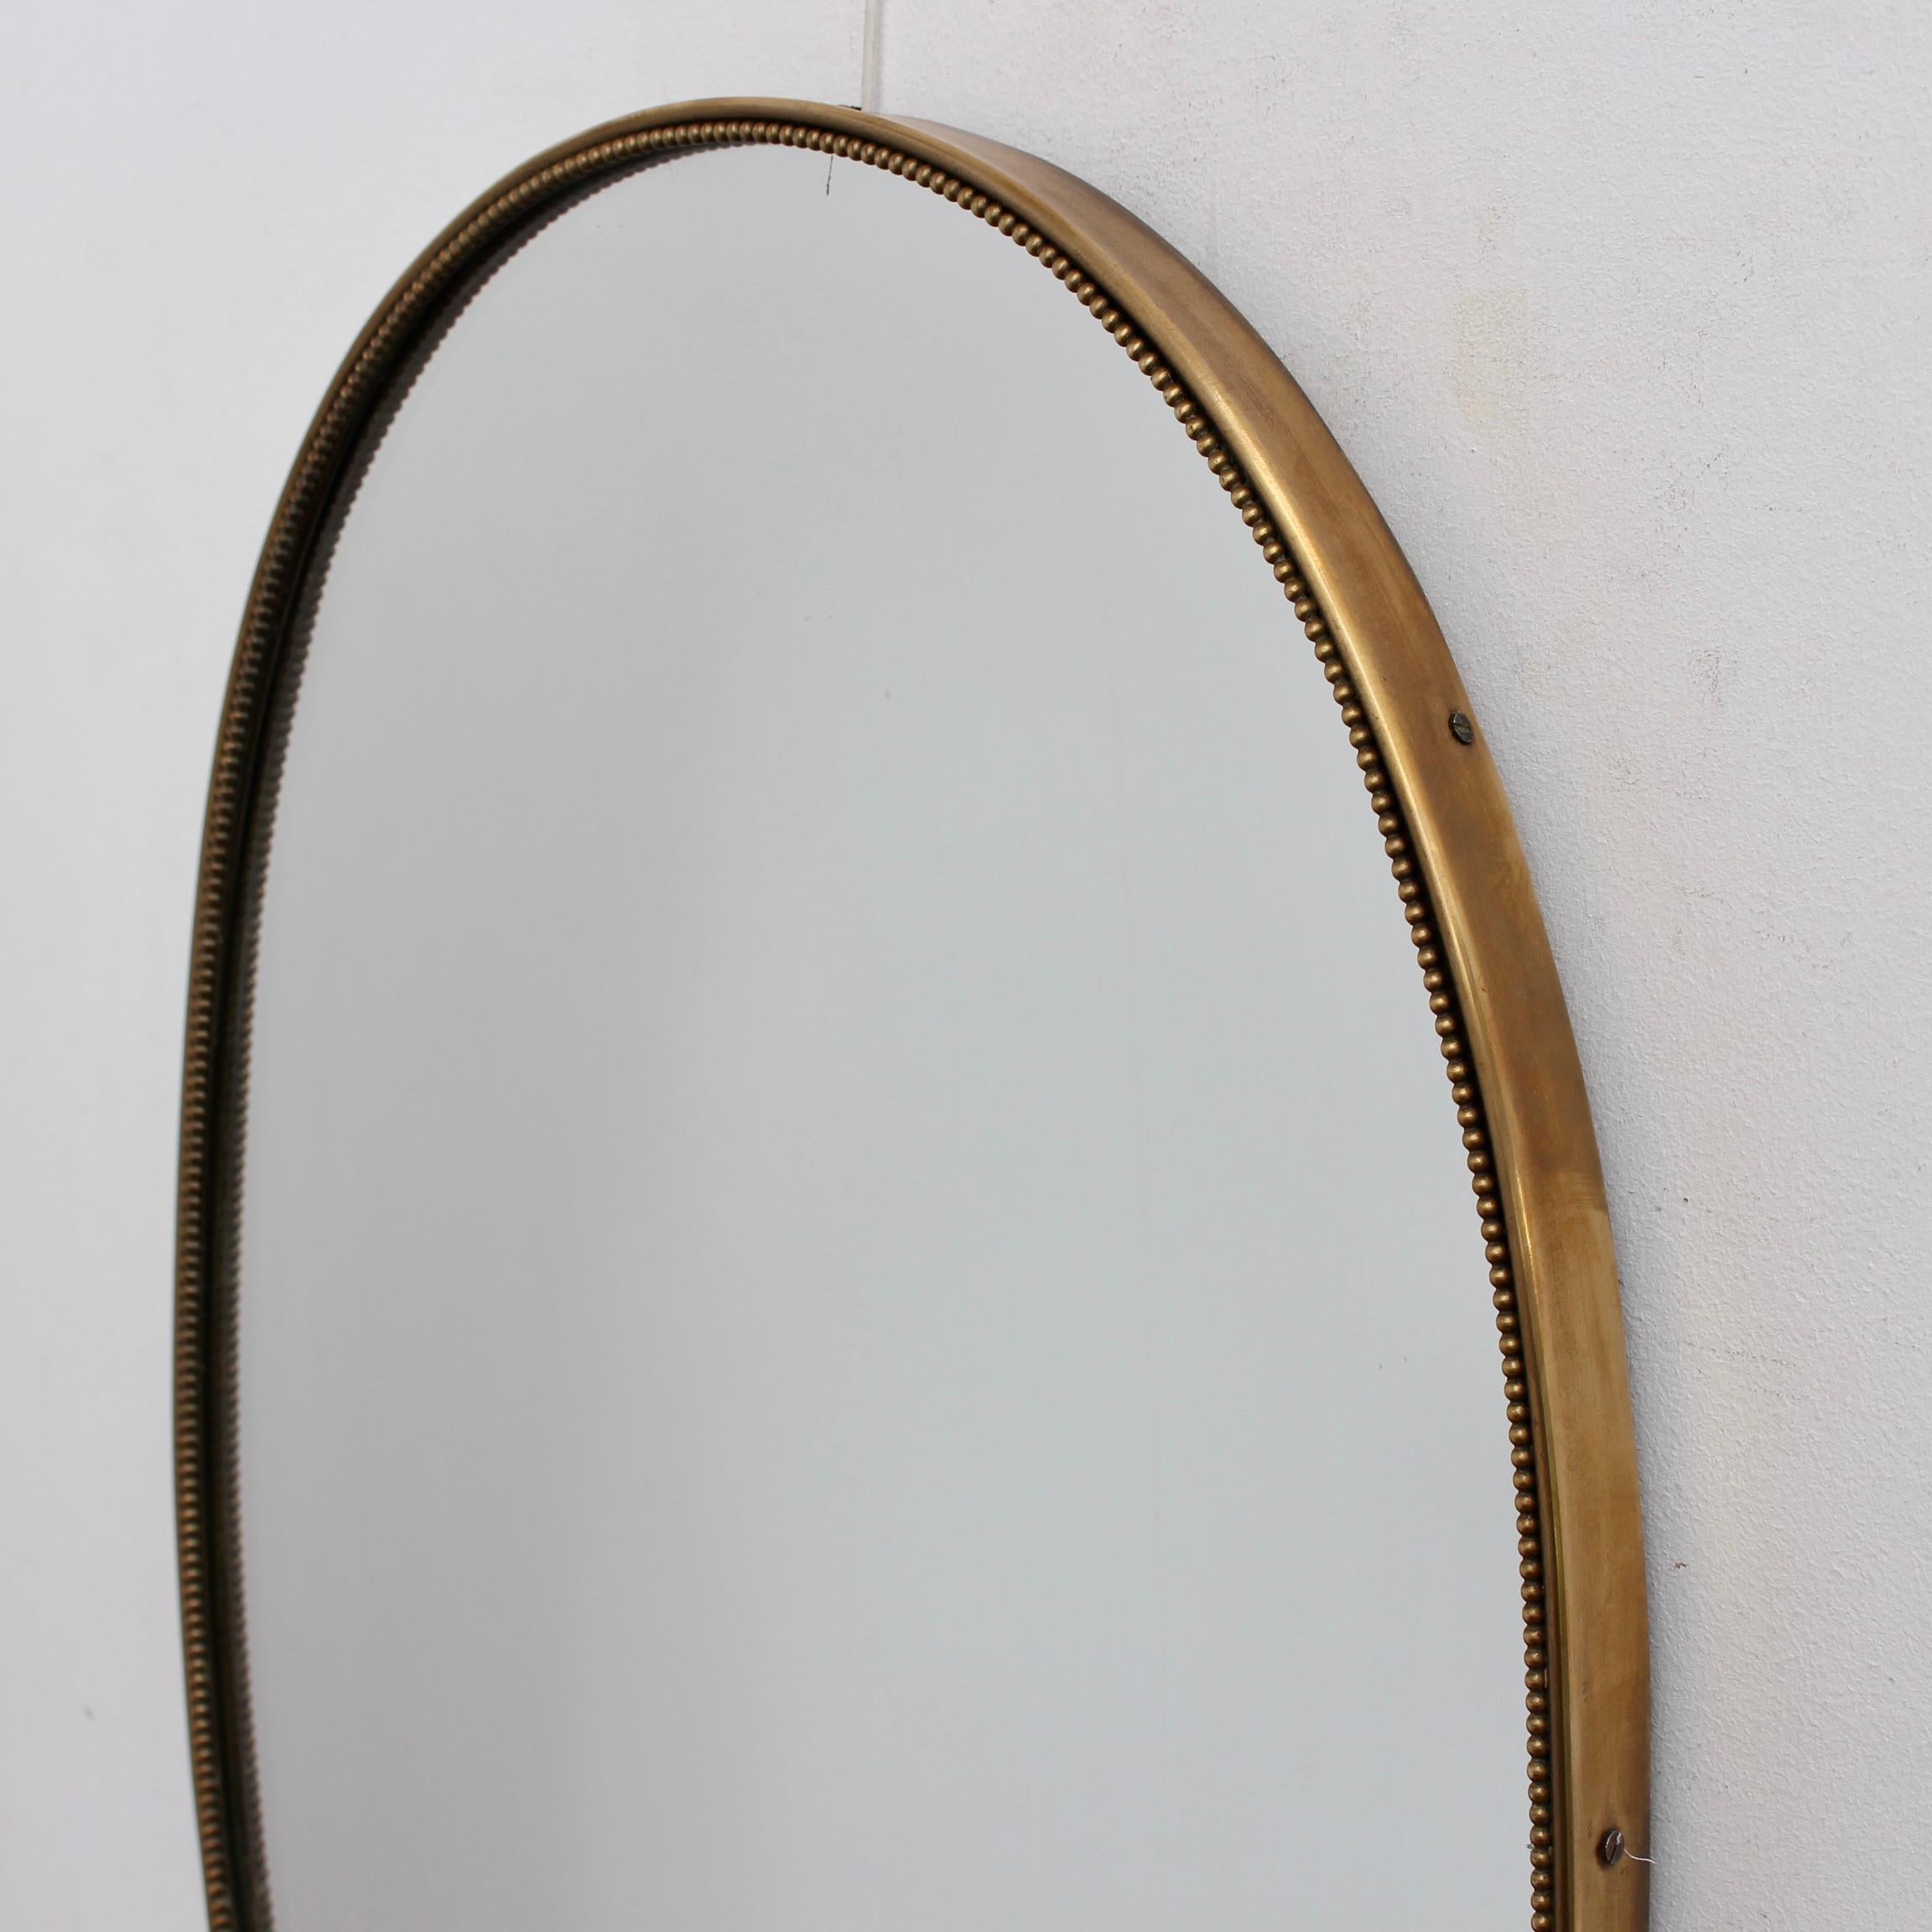 Vintage Italian Oval Wall Mirror with Brass Frame and Beading (circa 1950s) For Sale 5